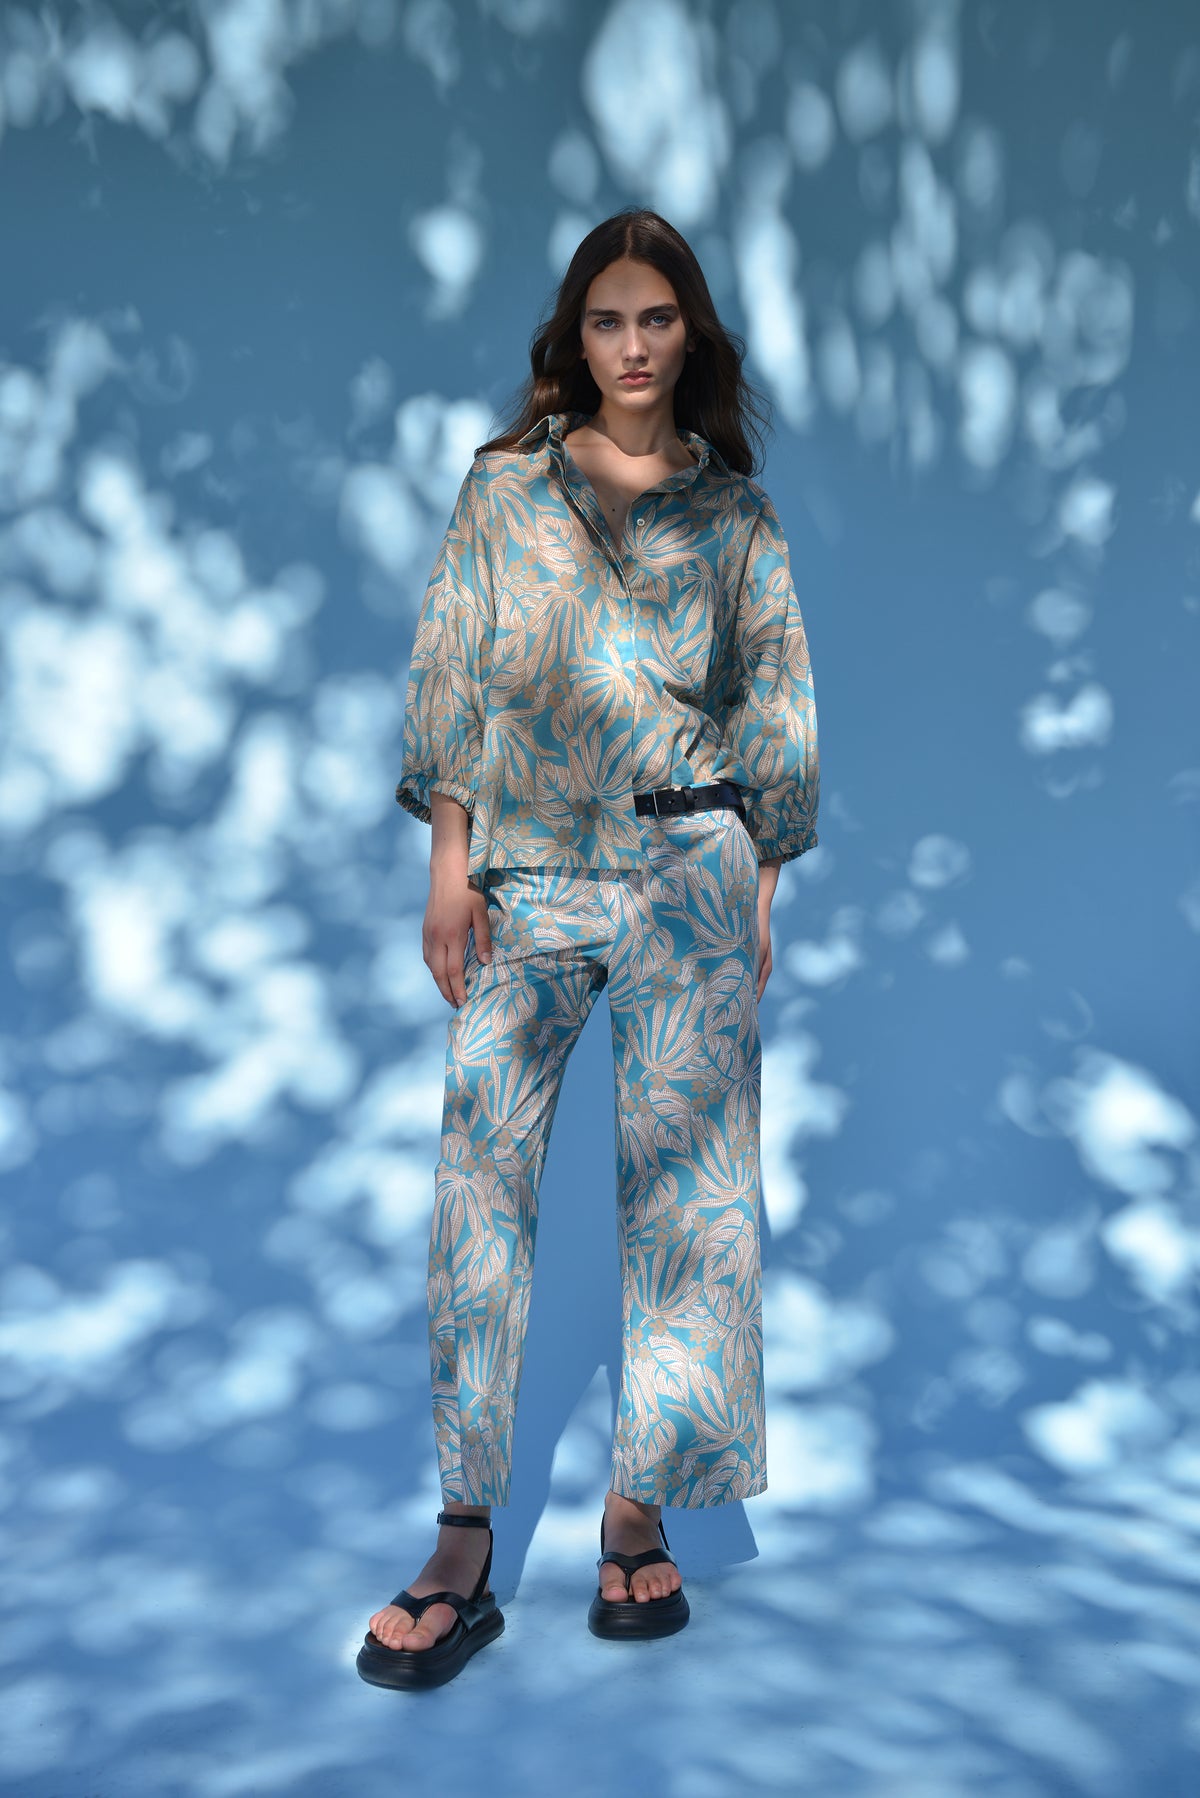 printed blouse 1670.350.441
printed trousers 6690.351.441